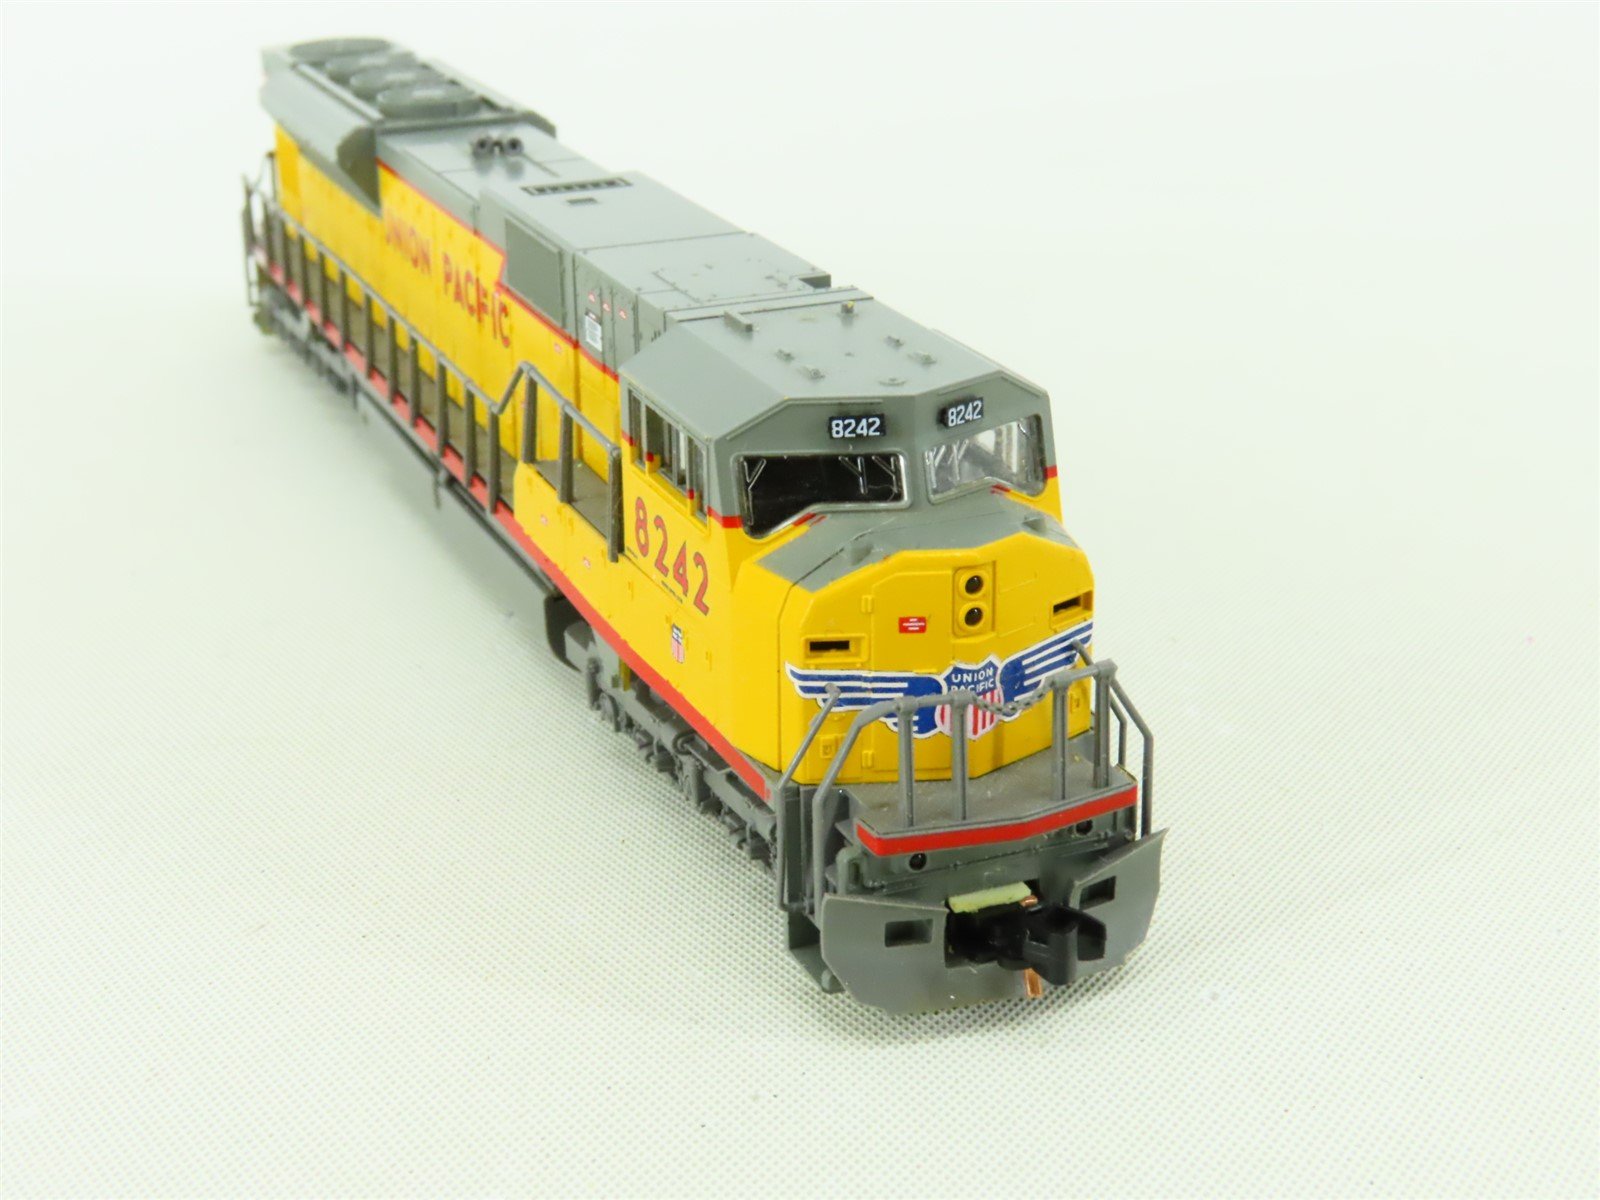 N Scale KATO 176-5613 UP Union Pacific EMD SD90/43MAC Diesel #8242 